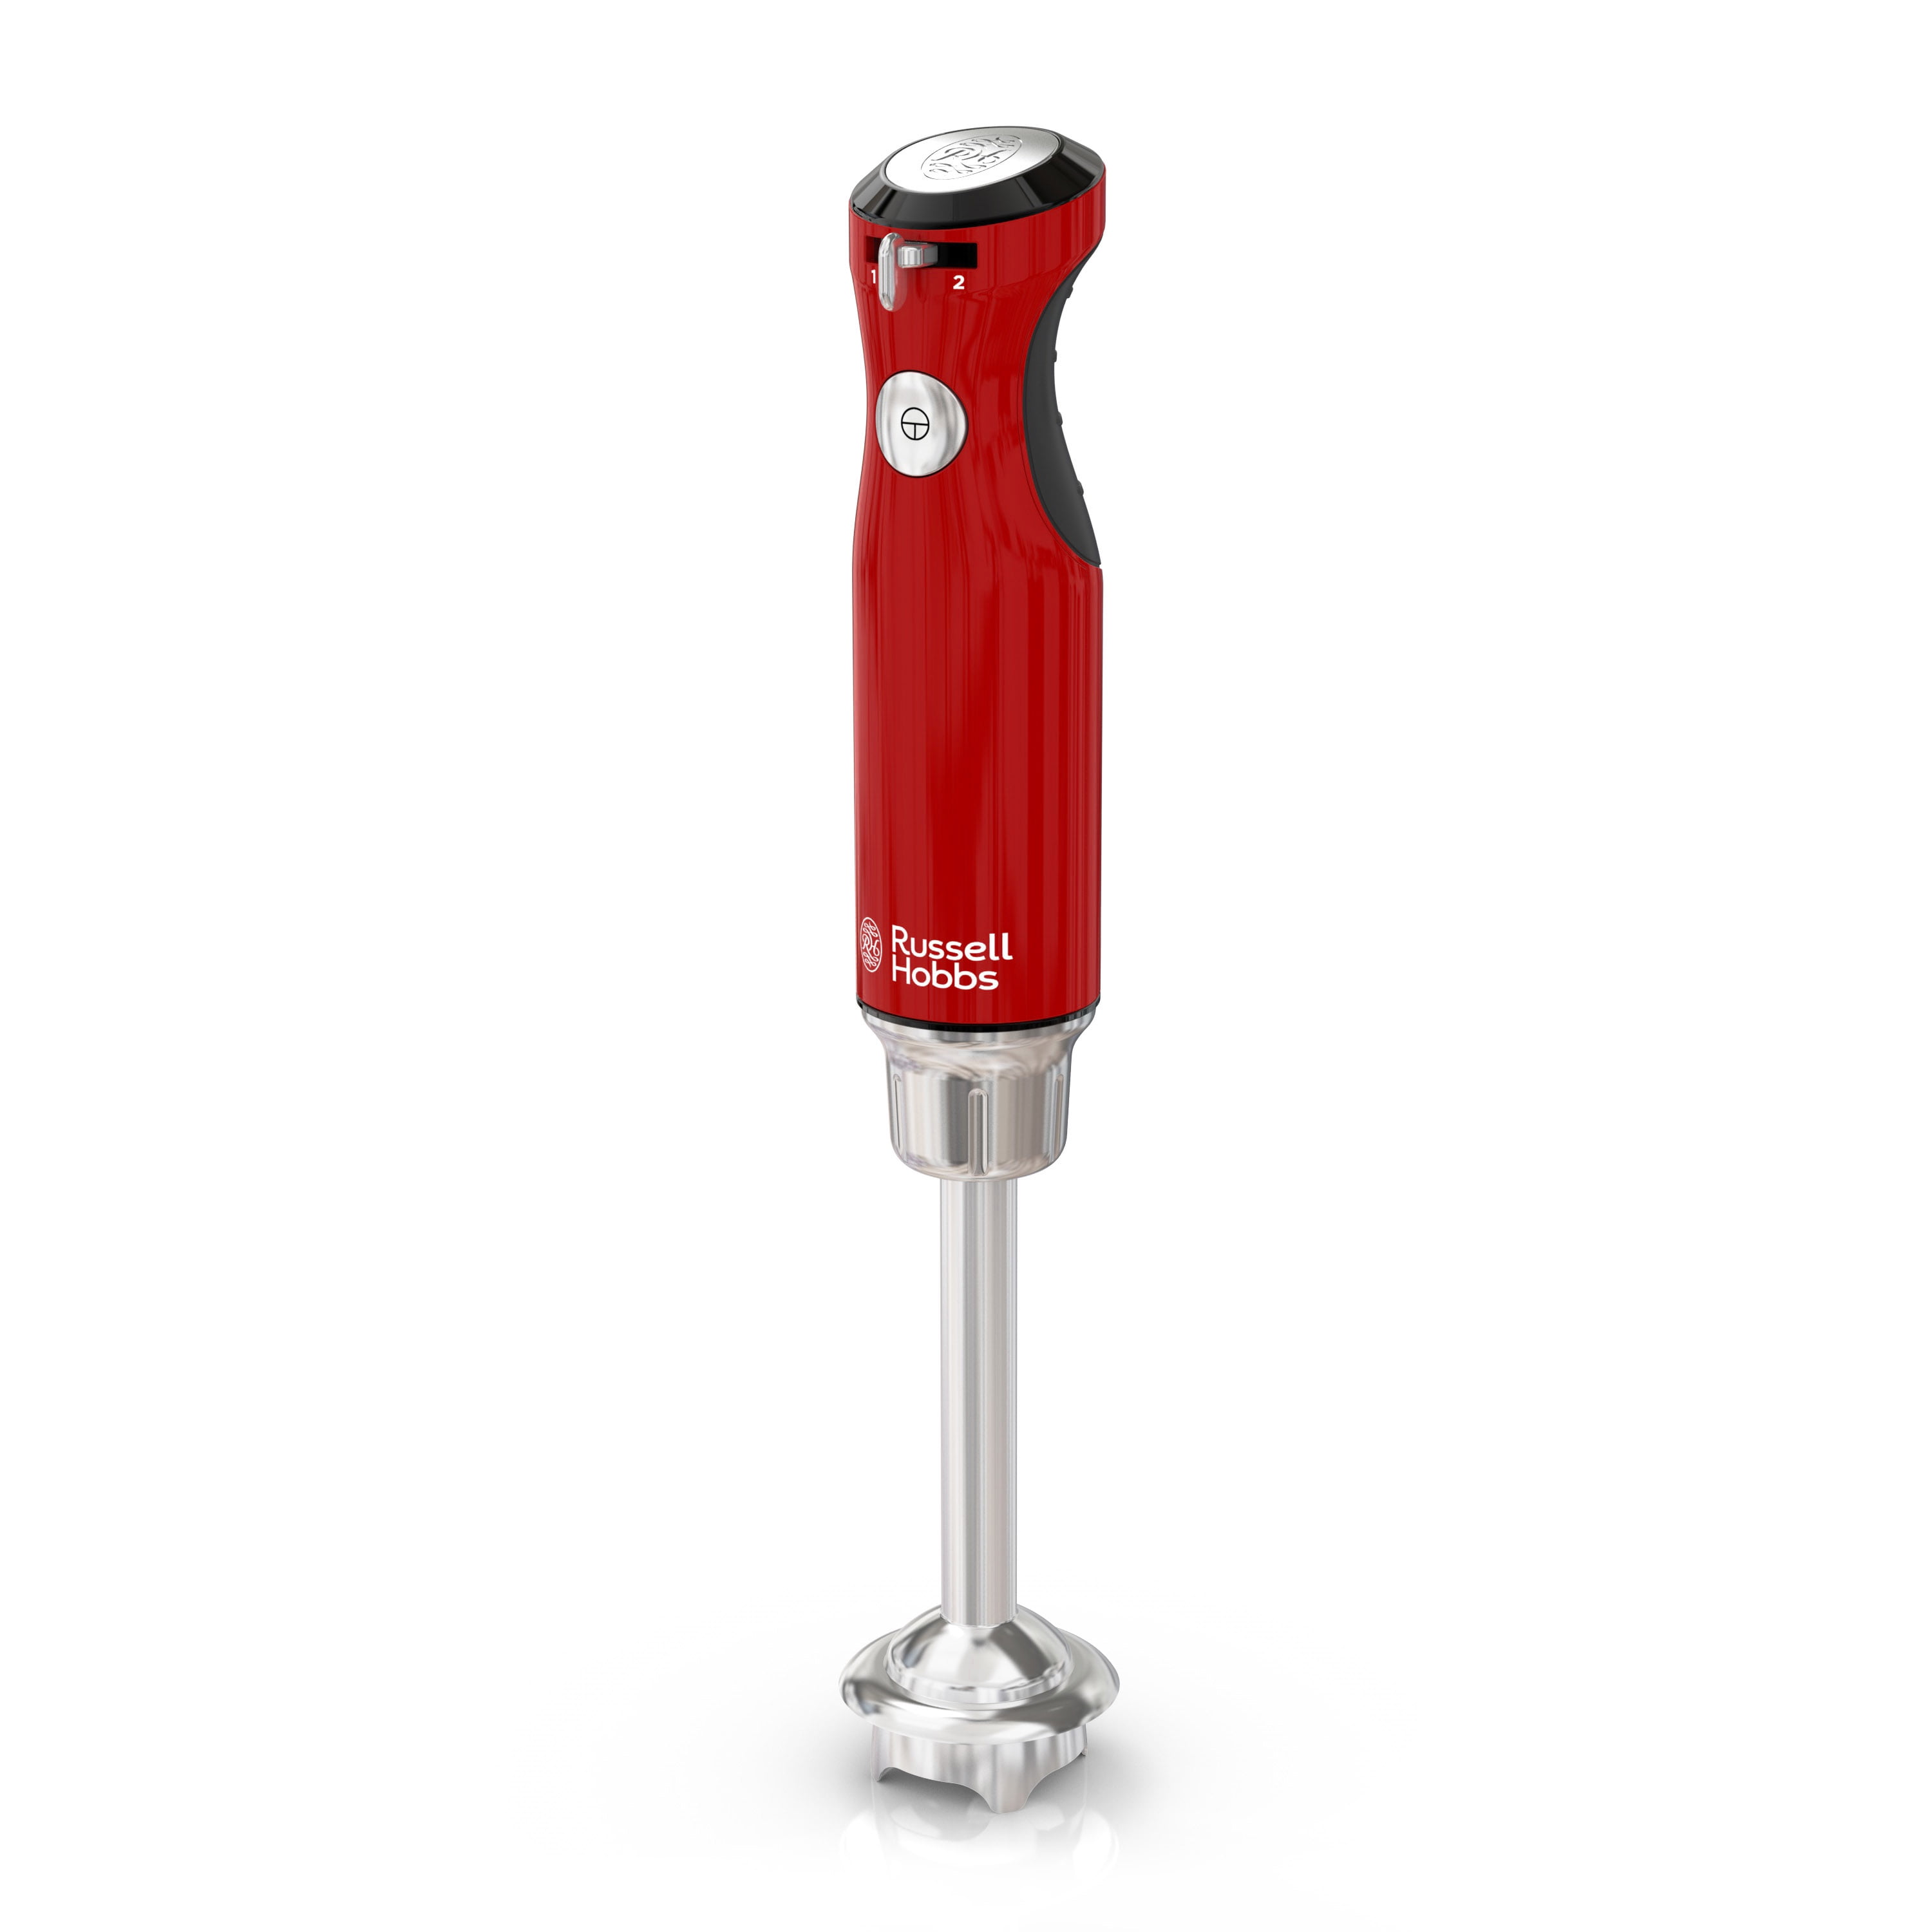 Russell Retro Style Immersion Blender, 1.0L Red, HB3100RDR Walmart.com